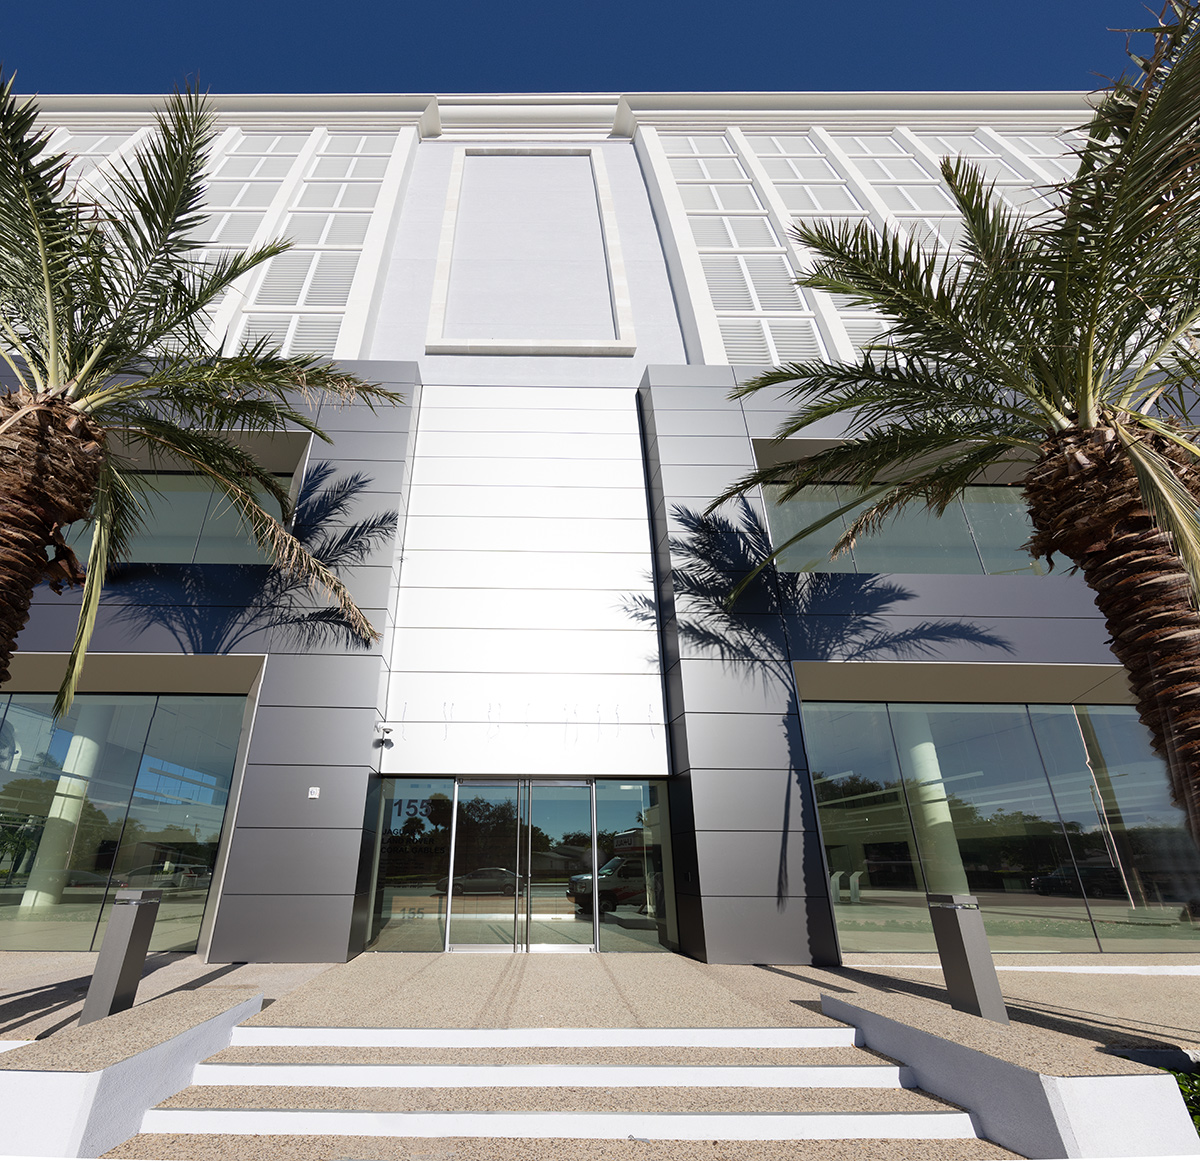 Architectural entrance view of the Miami Jaguar - Land Rover dealership.